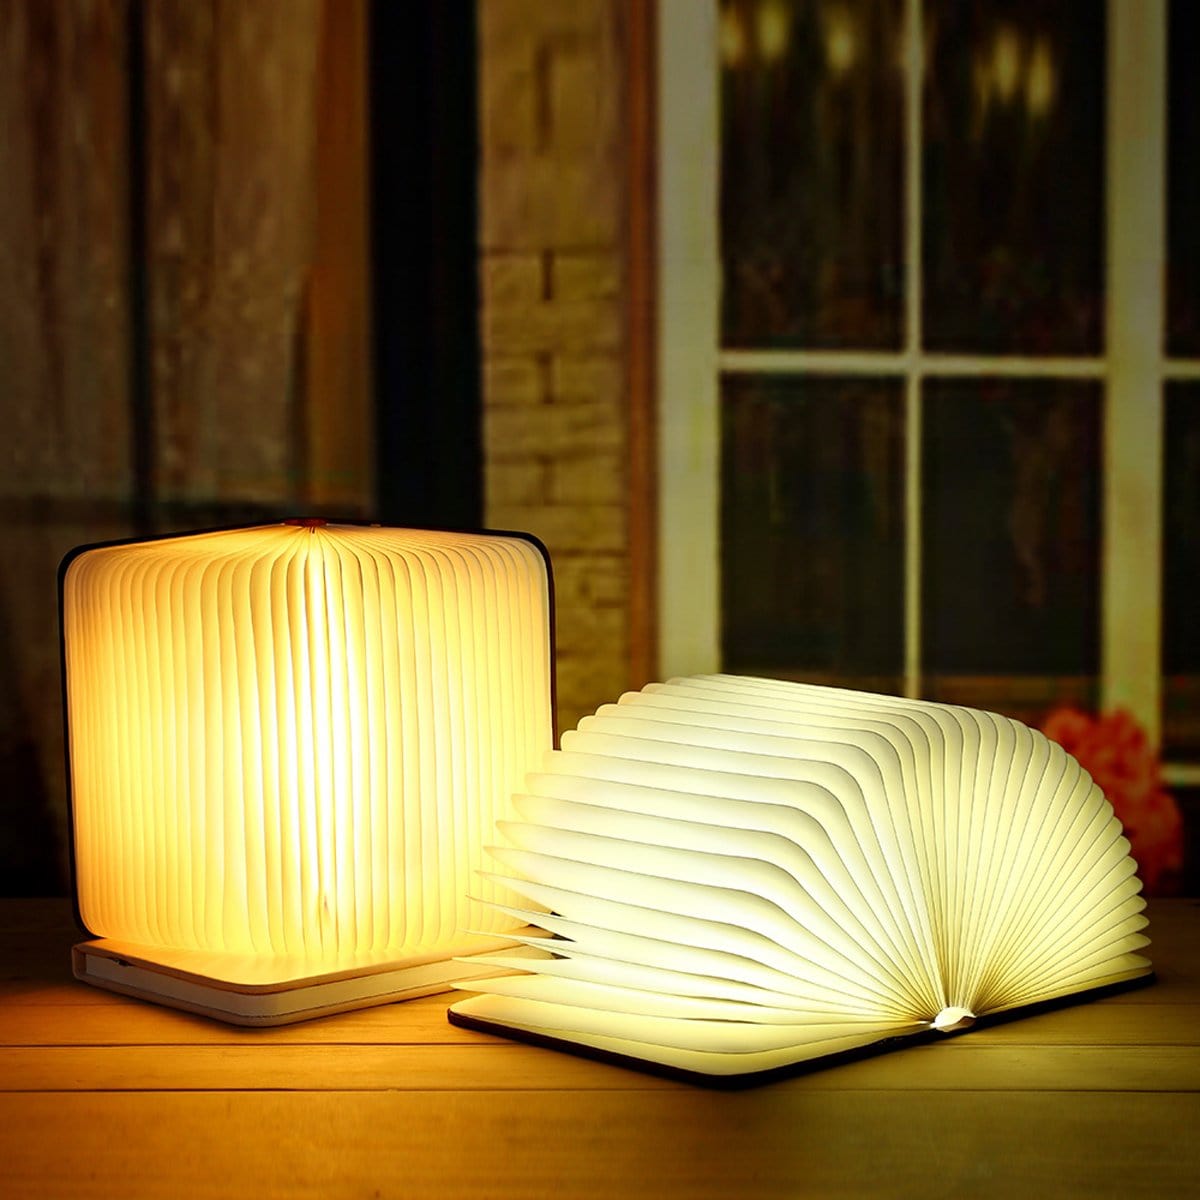 Book Lamp To My Wife - I Love You More LED Folding Book Light GiveMe-Gifts